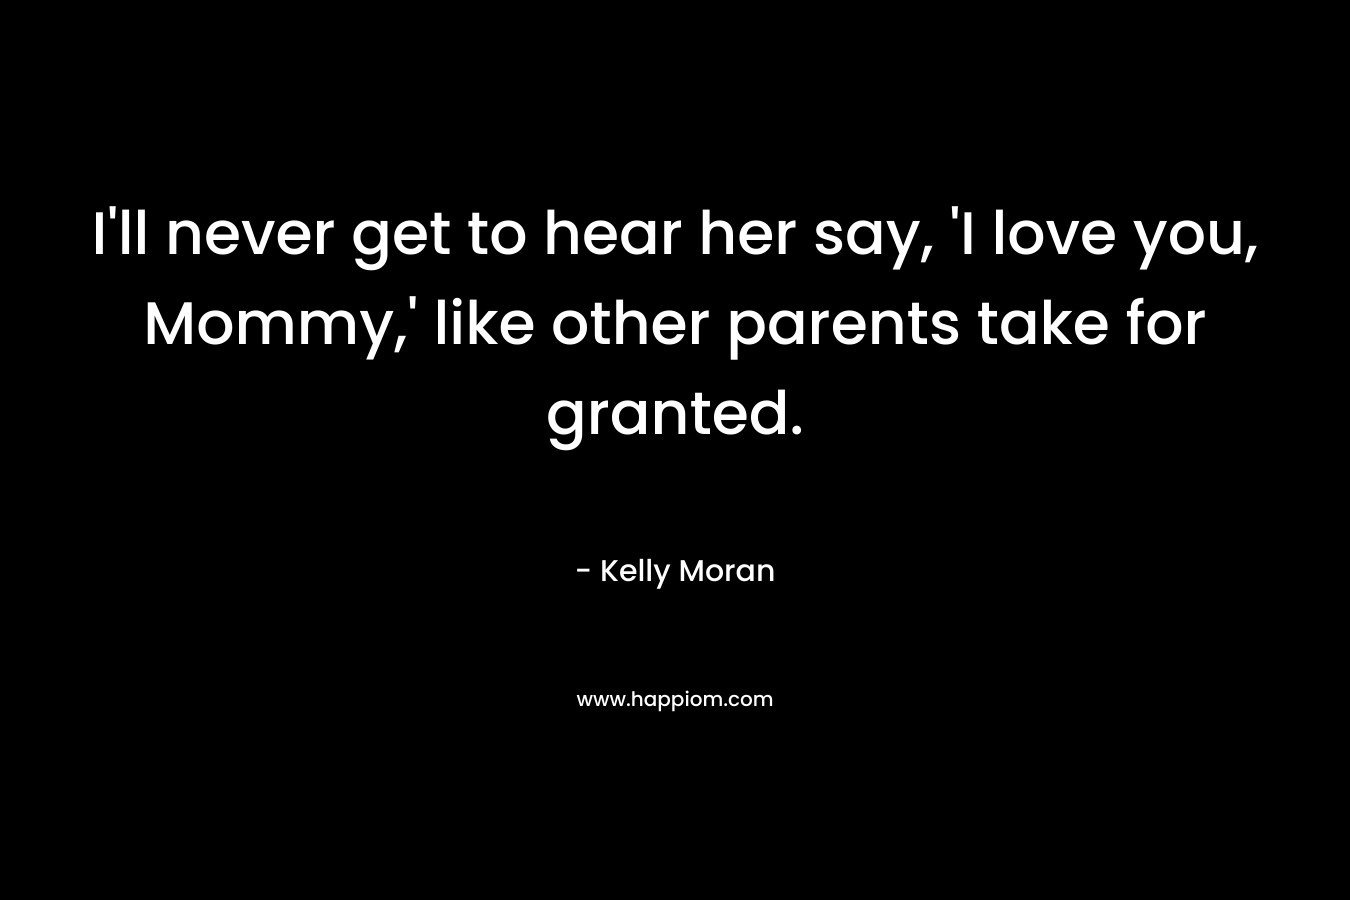 I'll never get to hear her say, 'I love you, Mommy,' like other parents take for granted.